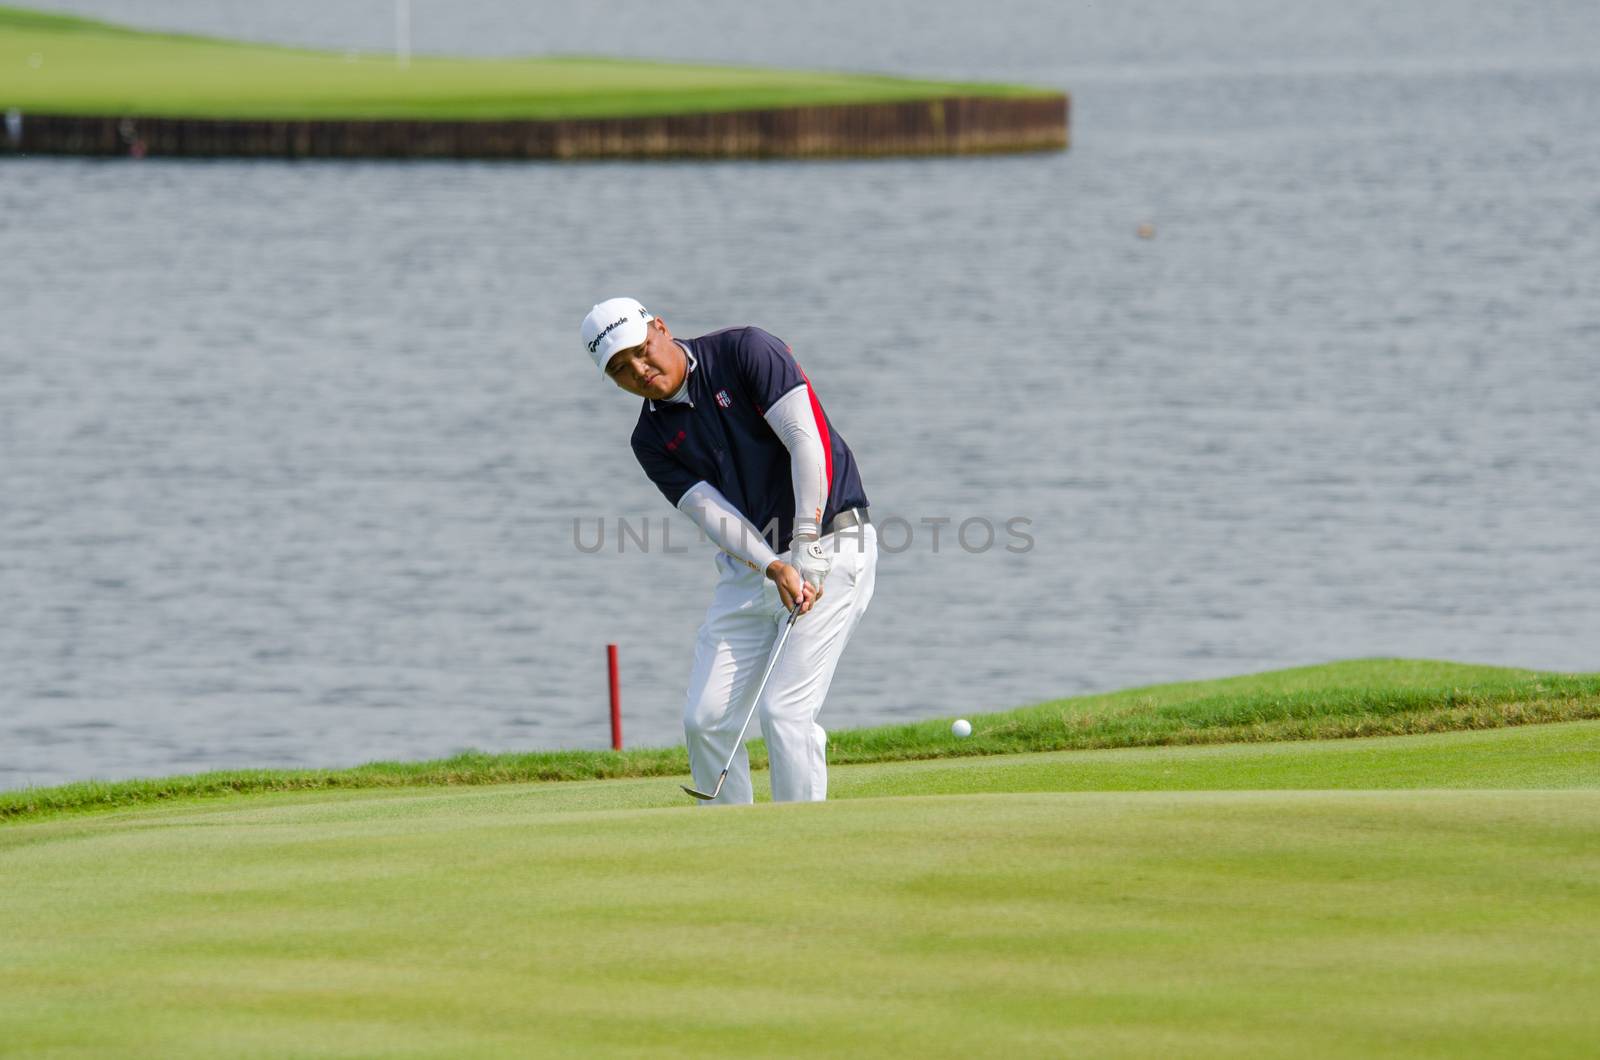 Lu Wei-chih of Taiwan player in Thailand Golf Championship 2015 by chatchai